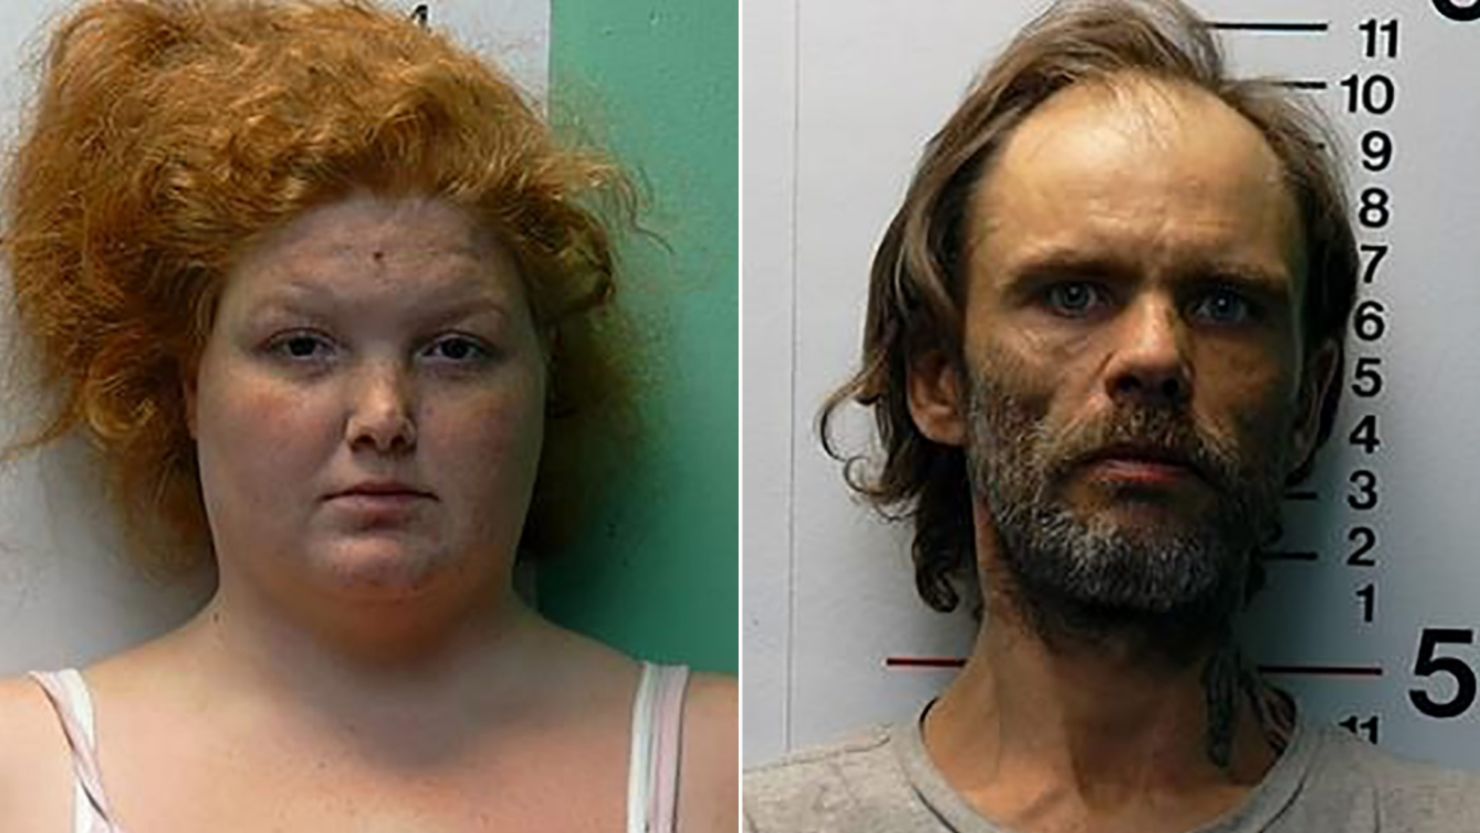 Brittany Gosney has been charged with murdering her 6-year-old son and disposing of his body in the Ohio River. Her boyfriend James Hamilton has been charged with abuse of a corpse and tampering with evidence.